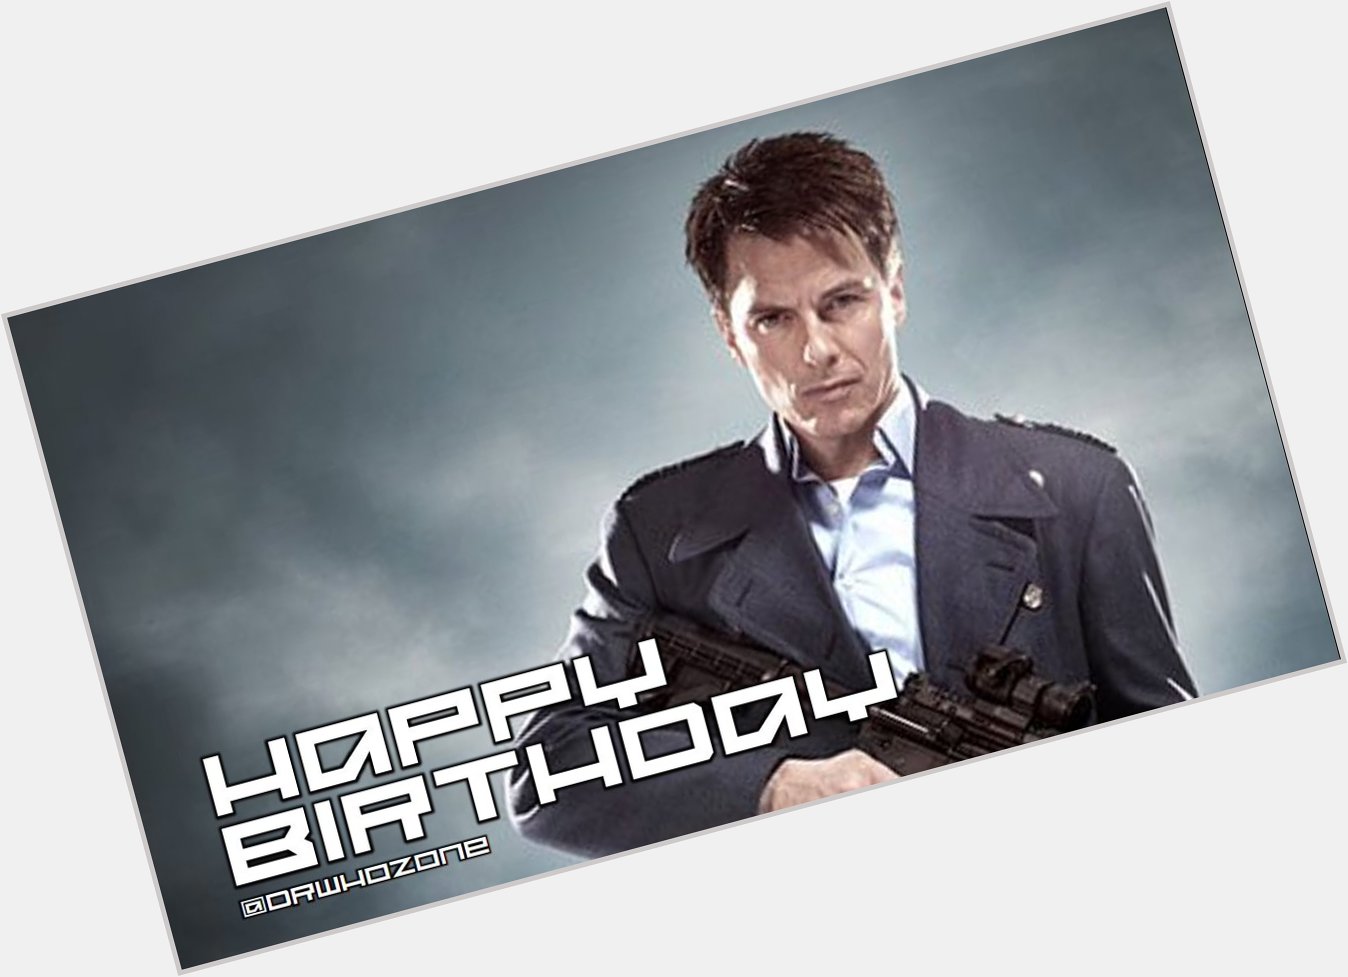 Also, Happy Birthday to John Barrowman - who plays (or played) Captain Jack. 